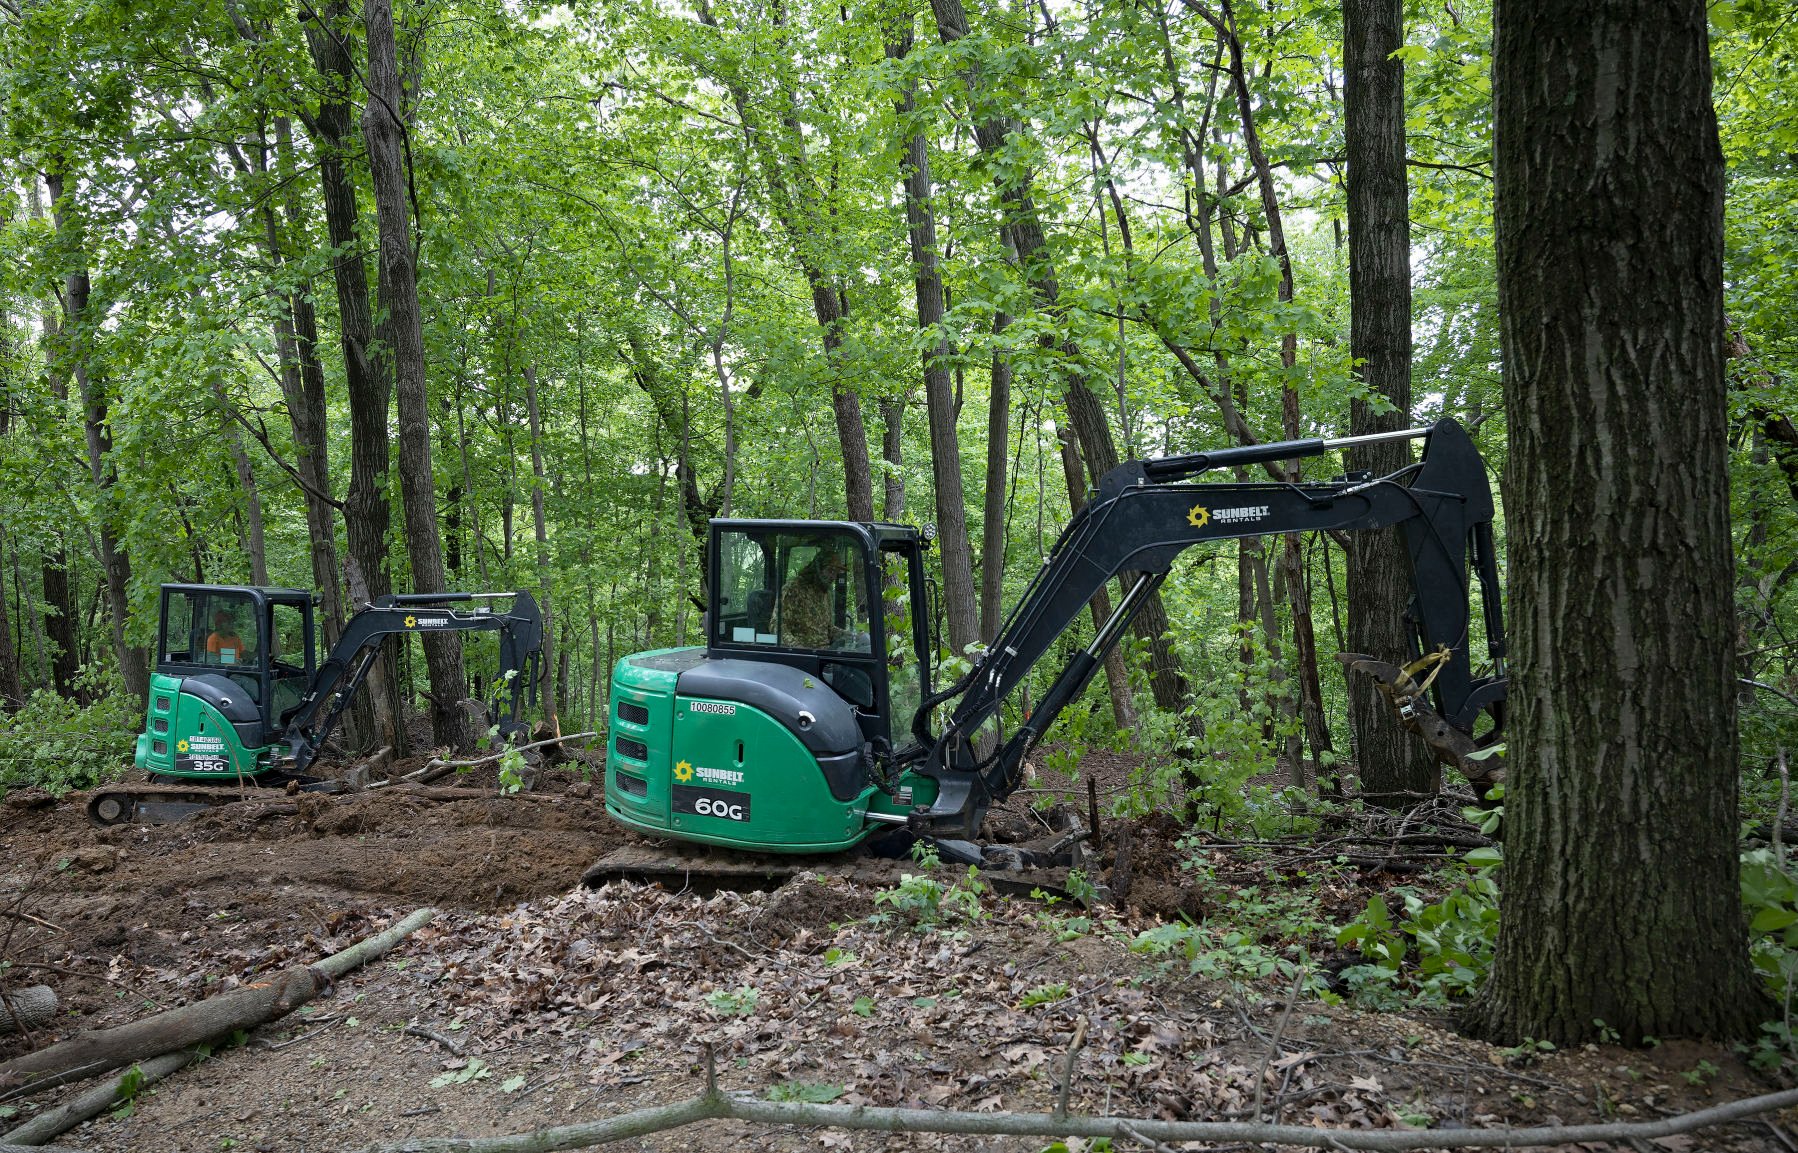 Employees with Pathfinder Trail Building, of Eagan, Minn., work on a new mountain bike trail at Chestnut Mountain Resort in Galena, Ill., on Friday.    PHOTO CREDIT: Stephen Gassman